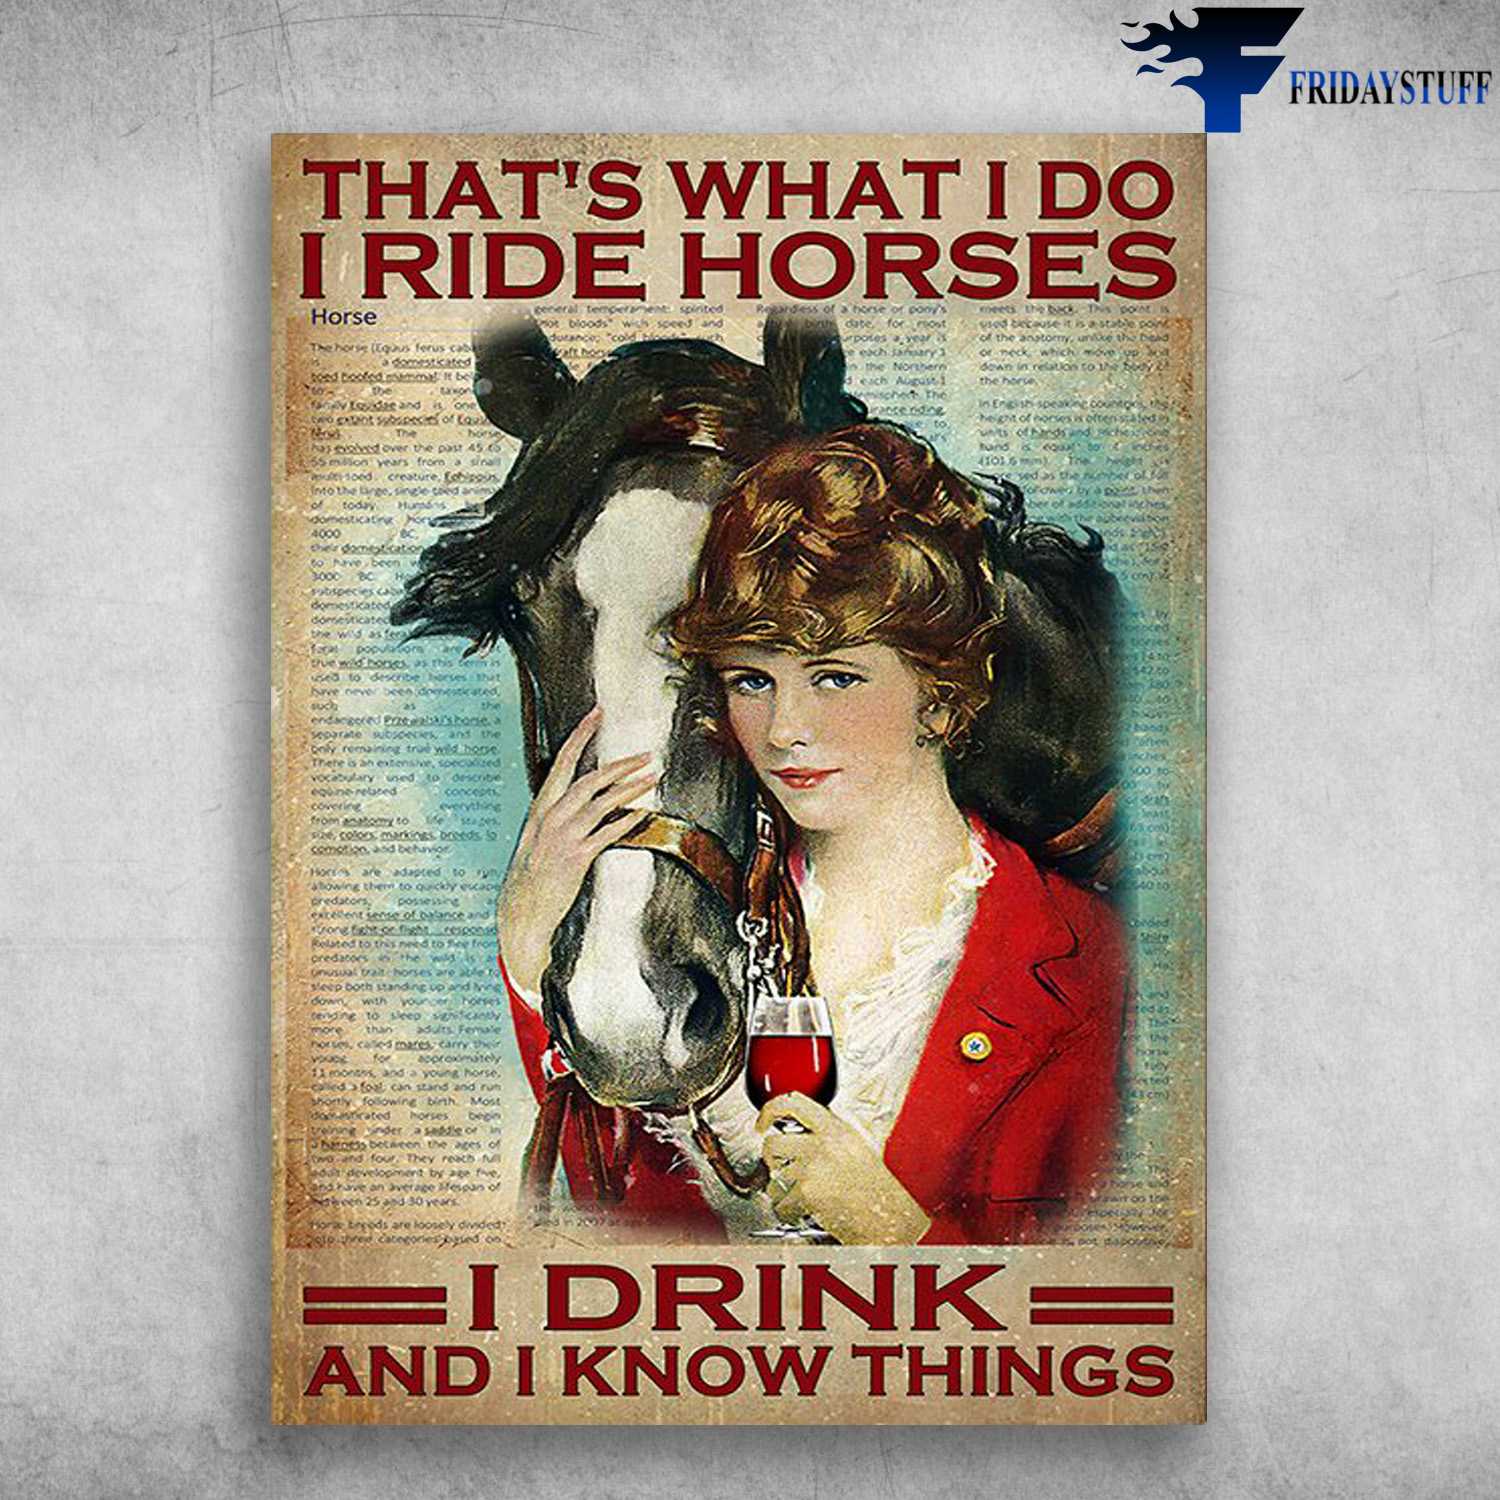 Lady Loves Horse - That's What I Do, I Ride Horses, I Drink, And I Know Things